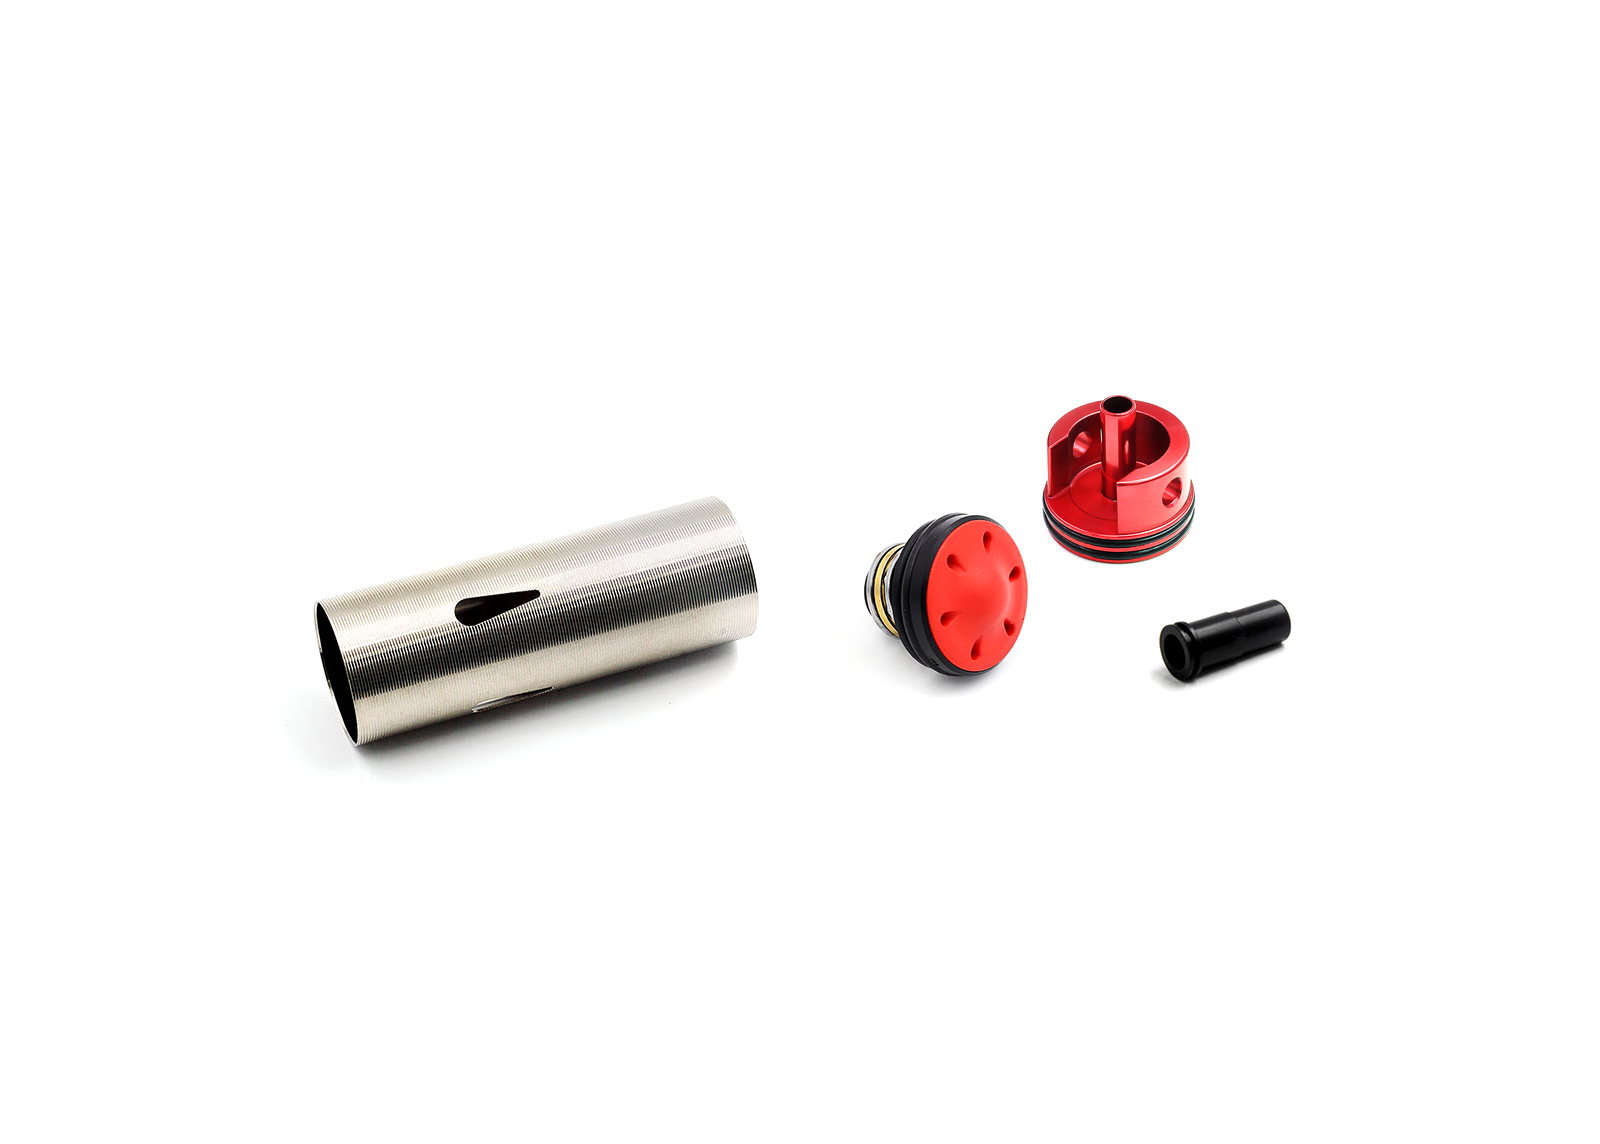 Bore-Up Cylinder Set for CAR15 - Modify AEG Airsoft parts